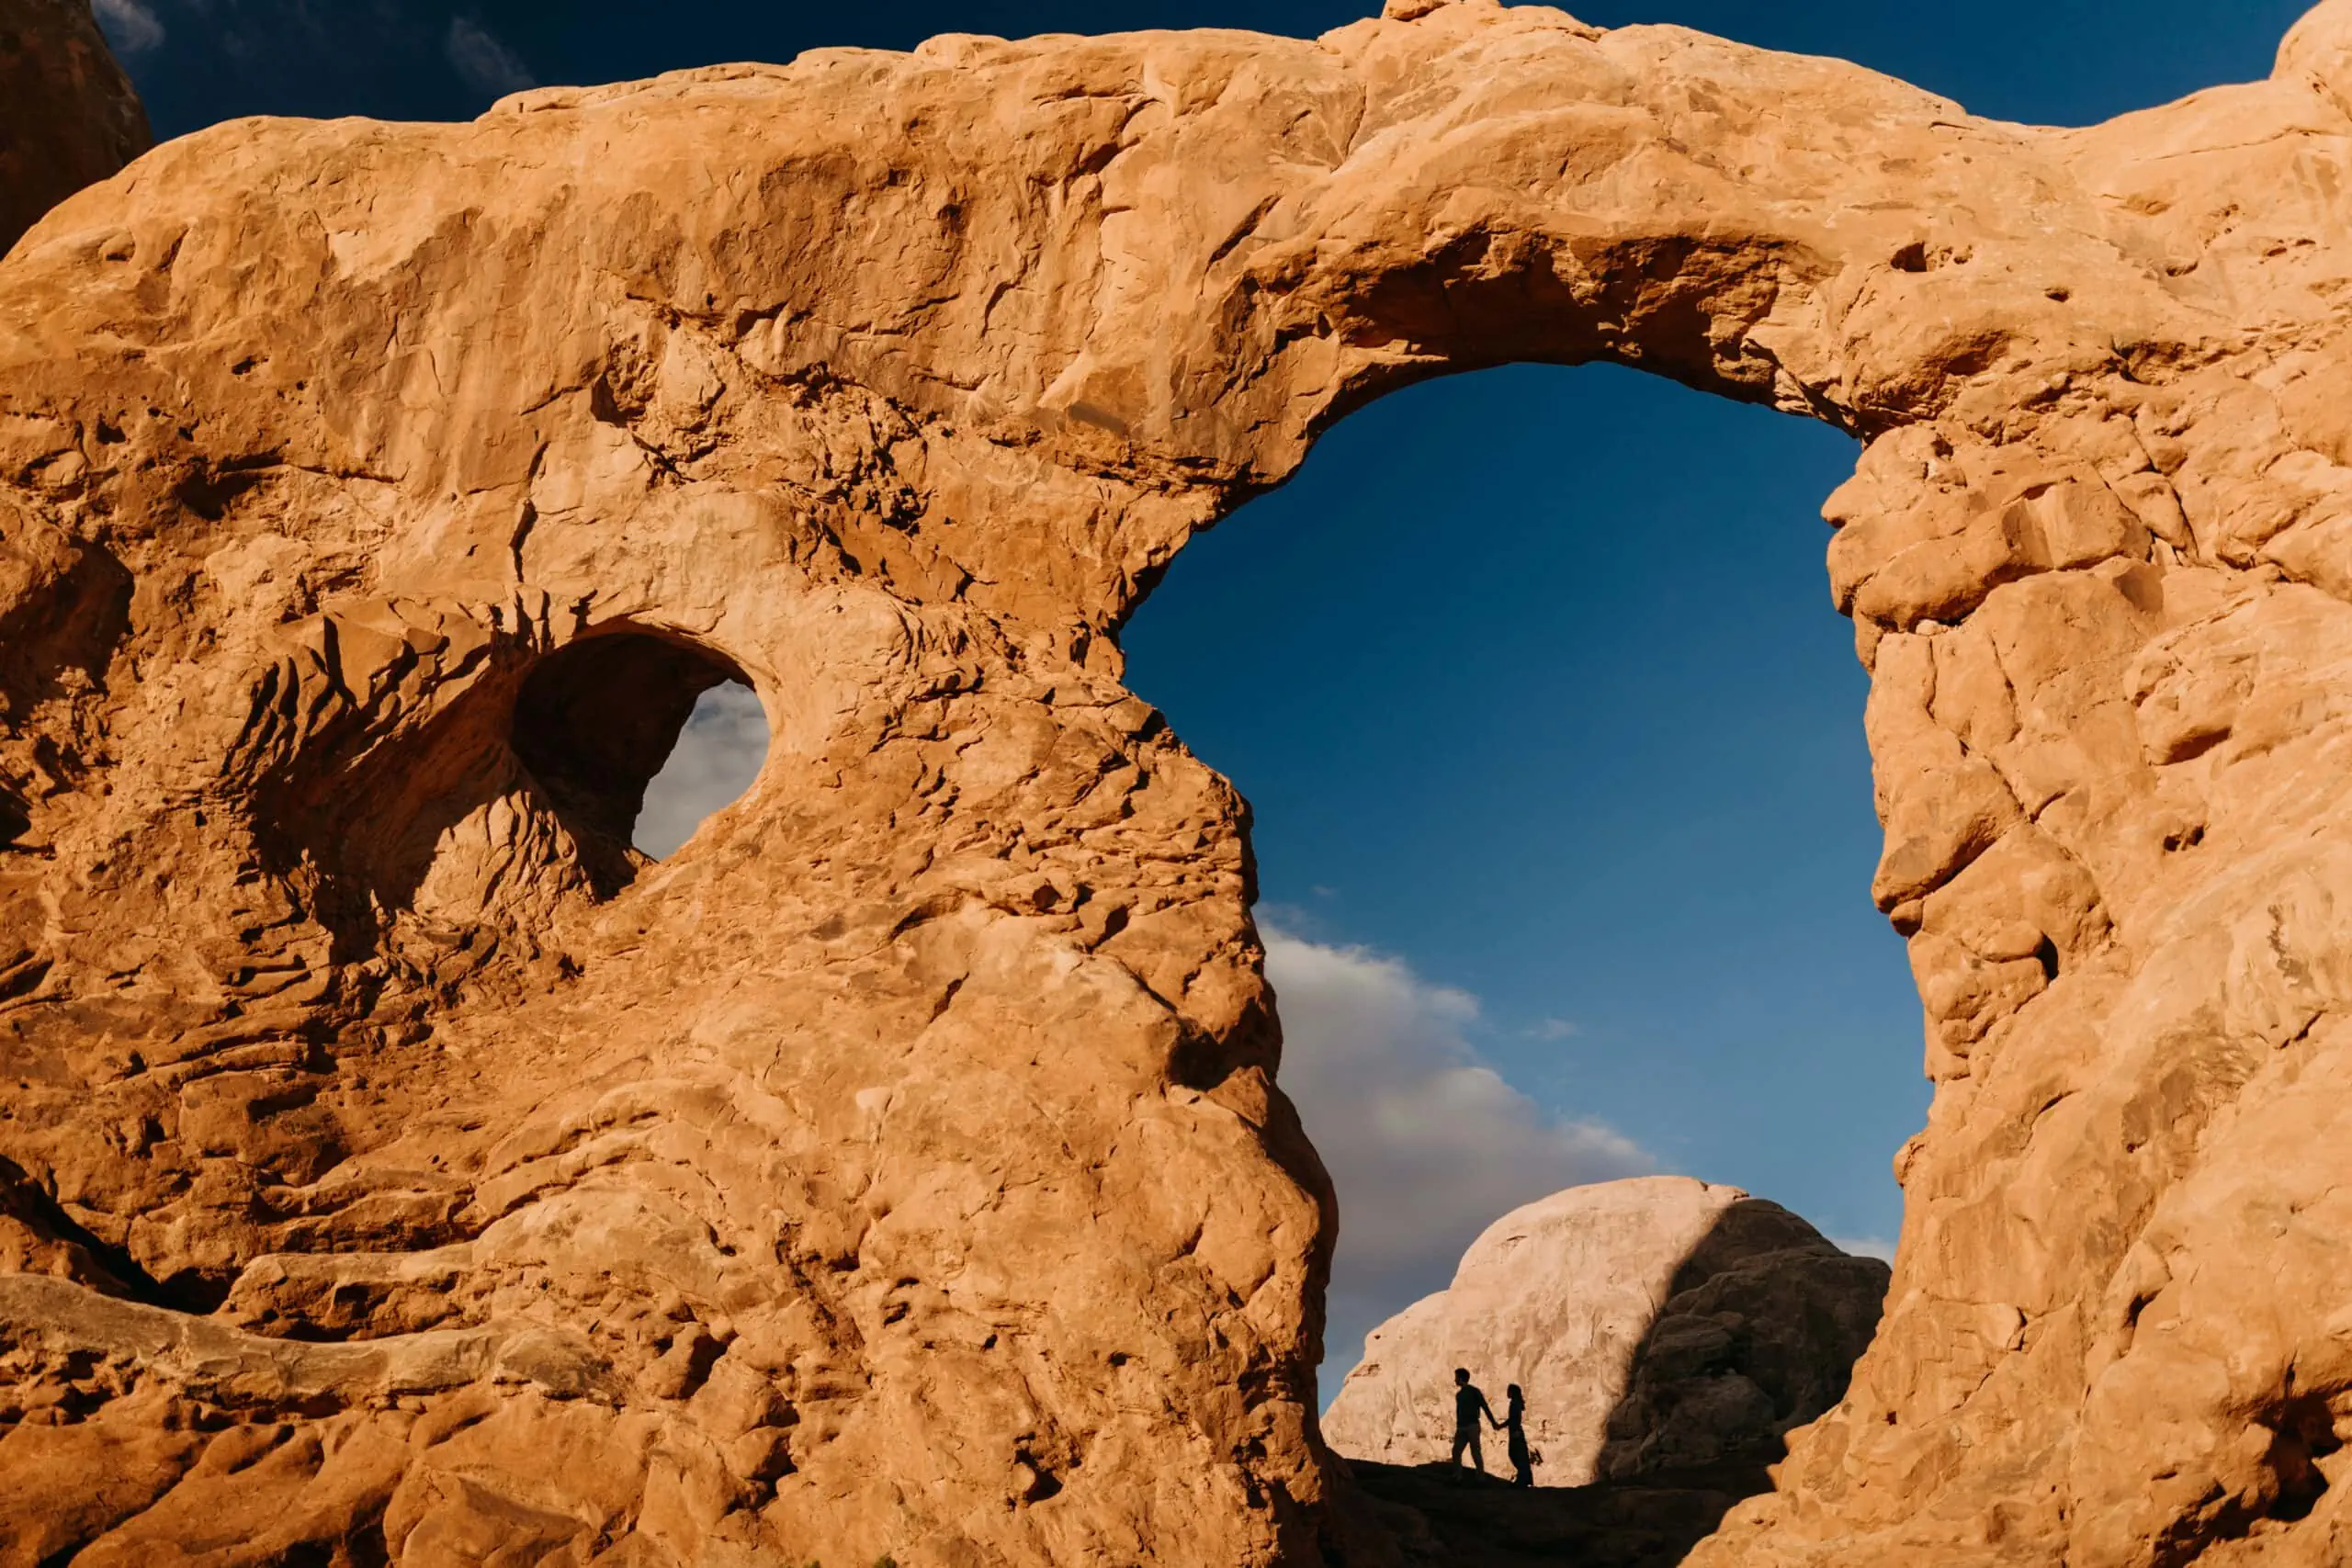 A couple explores an arch in Arches National Park.